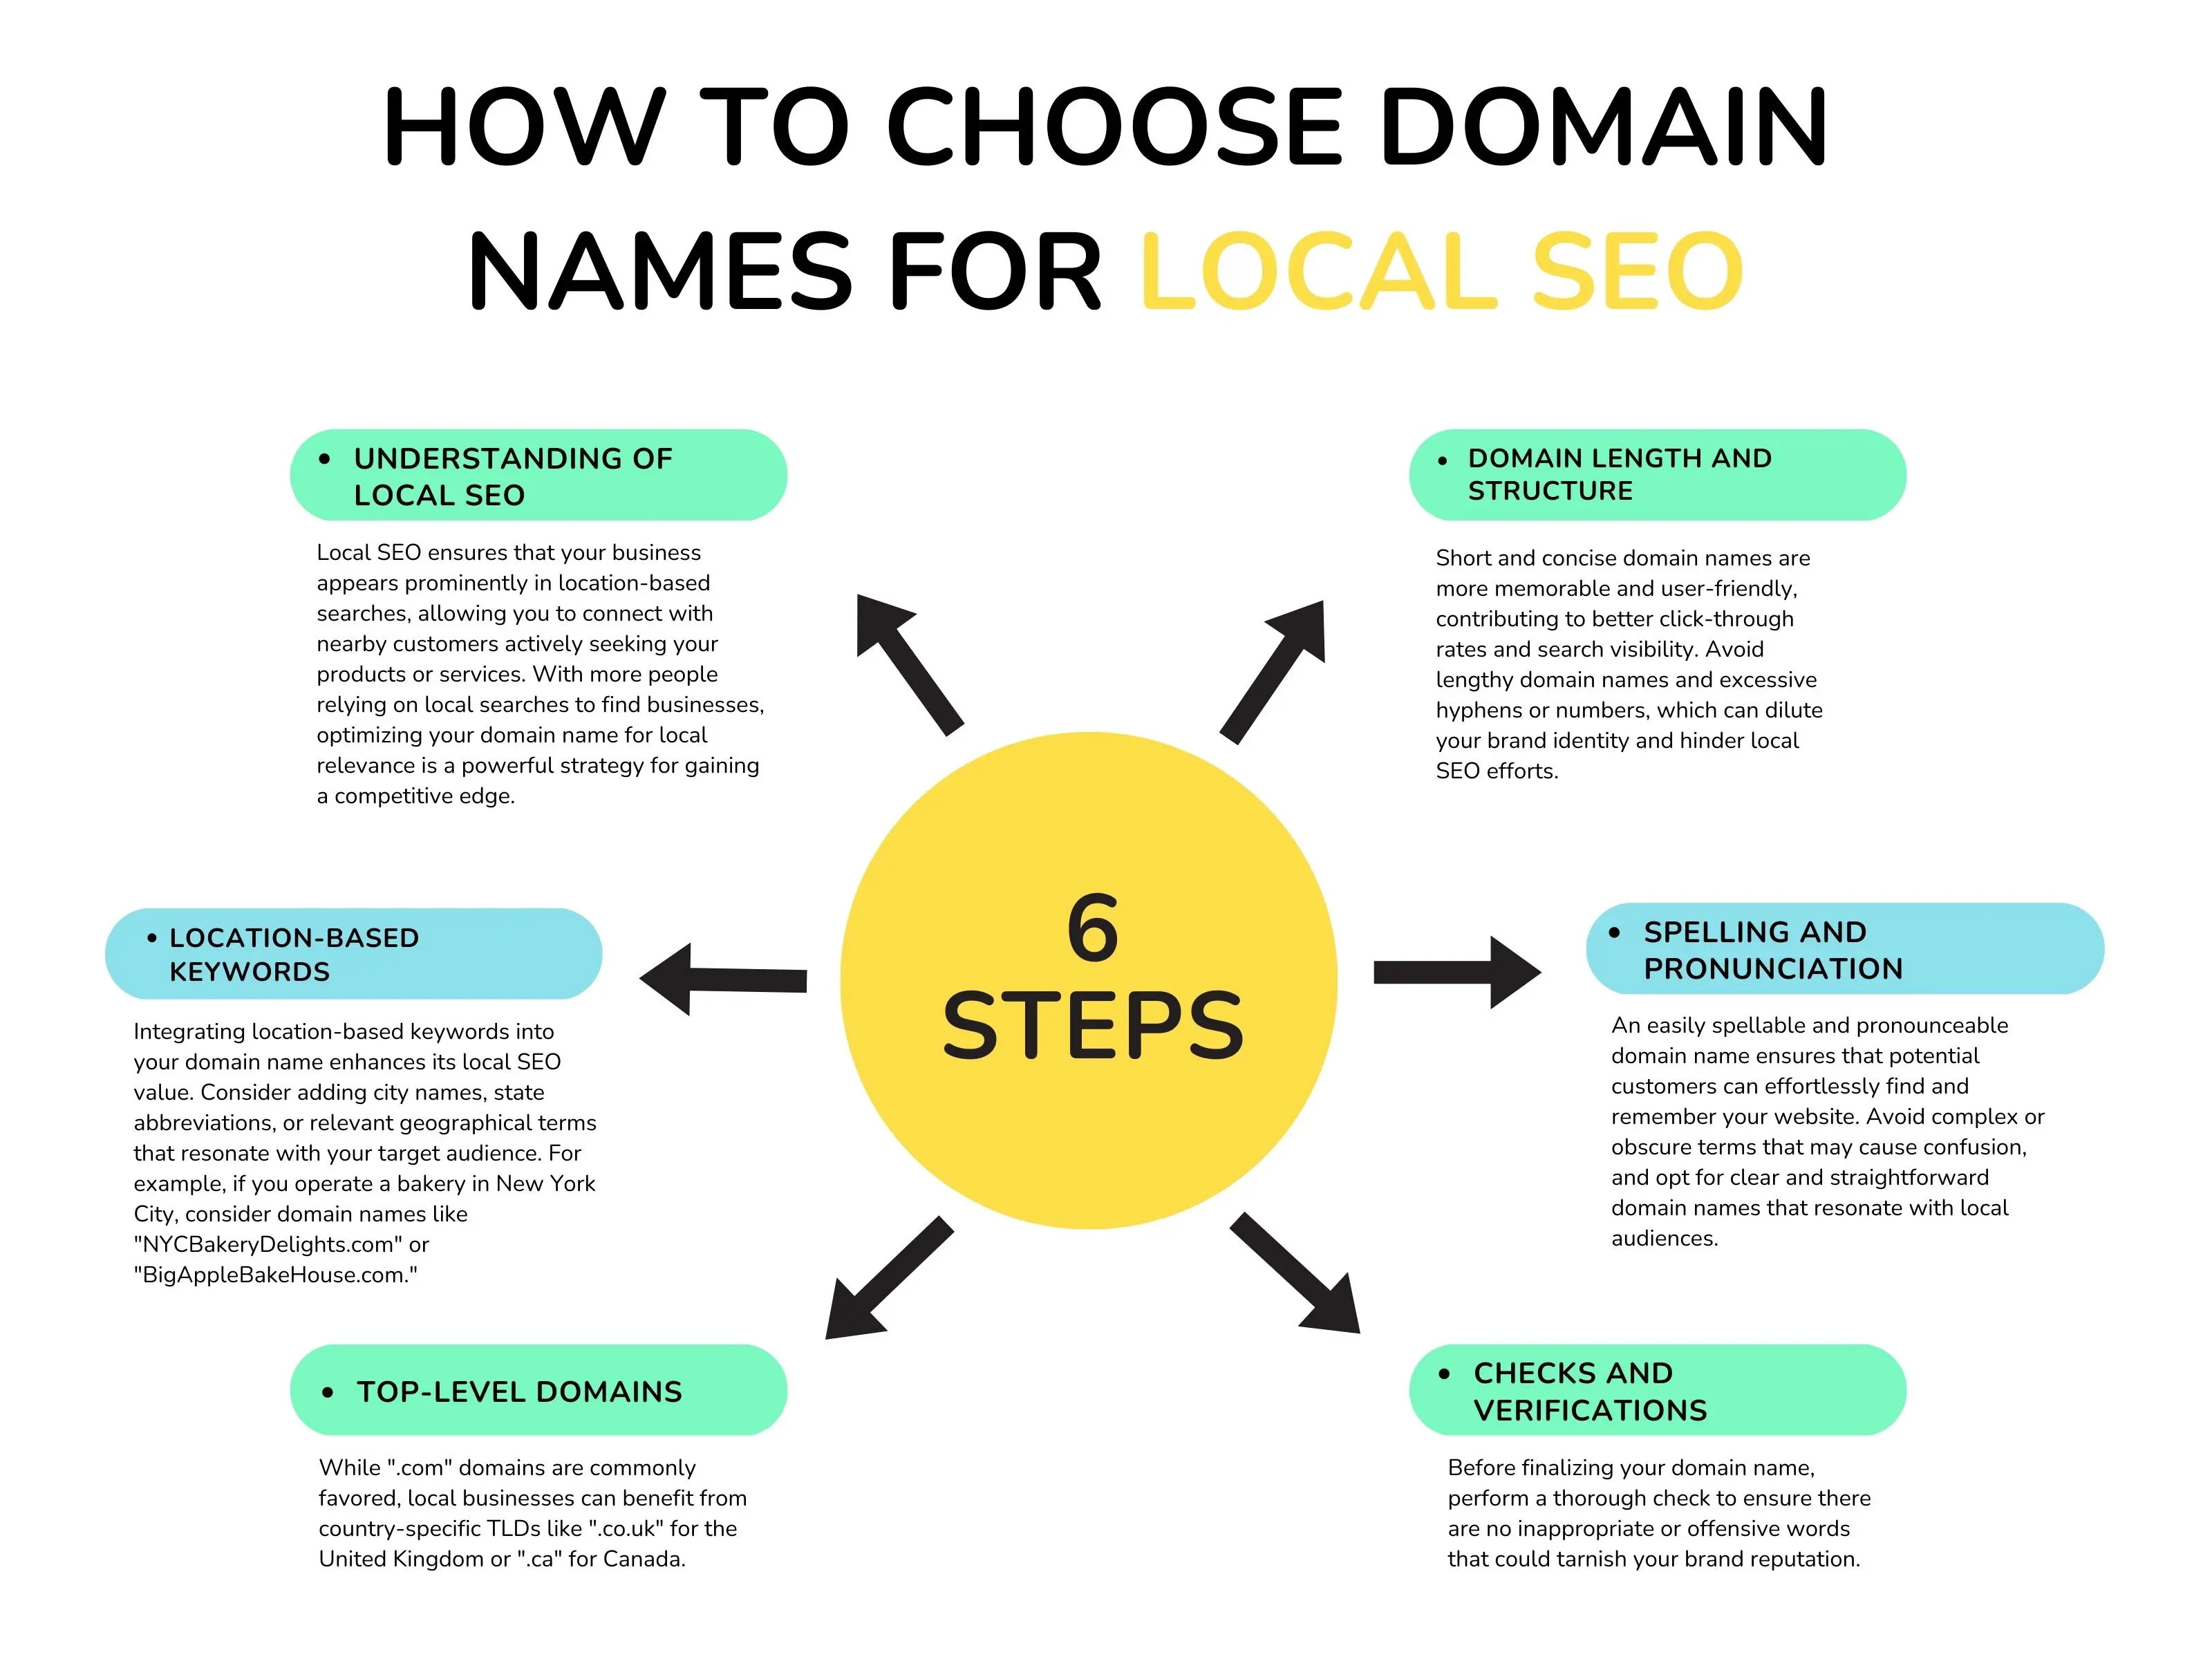 How to Choose Domain Names for Local SEO